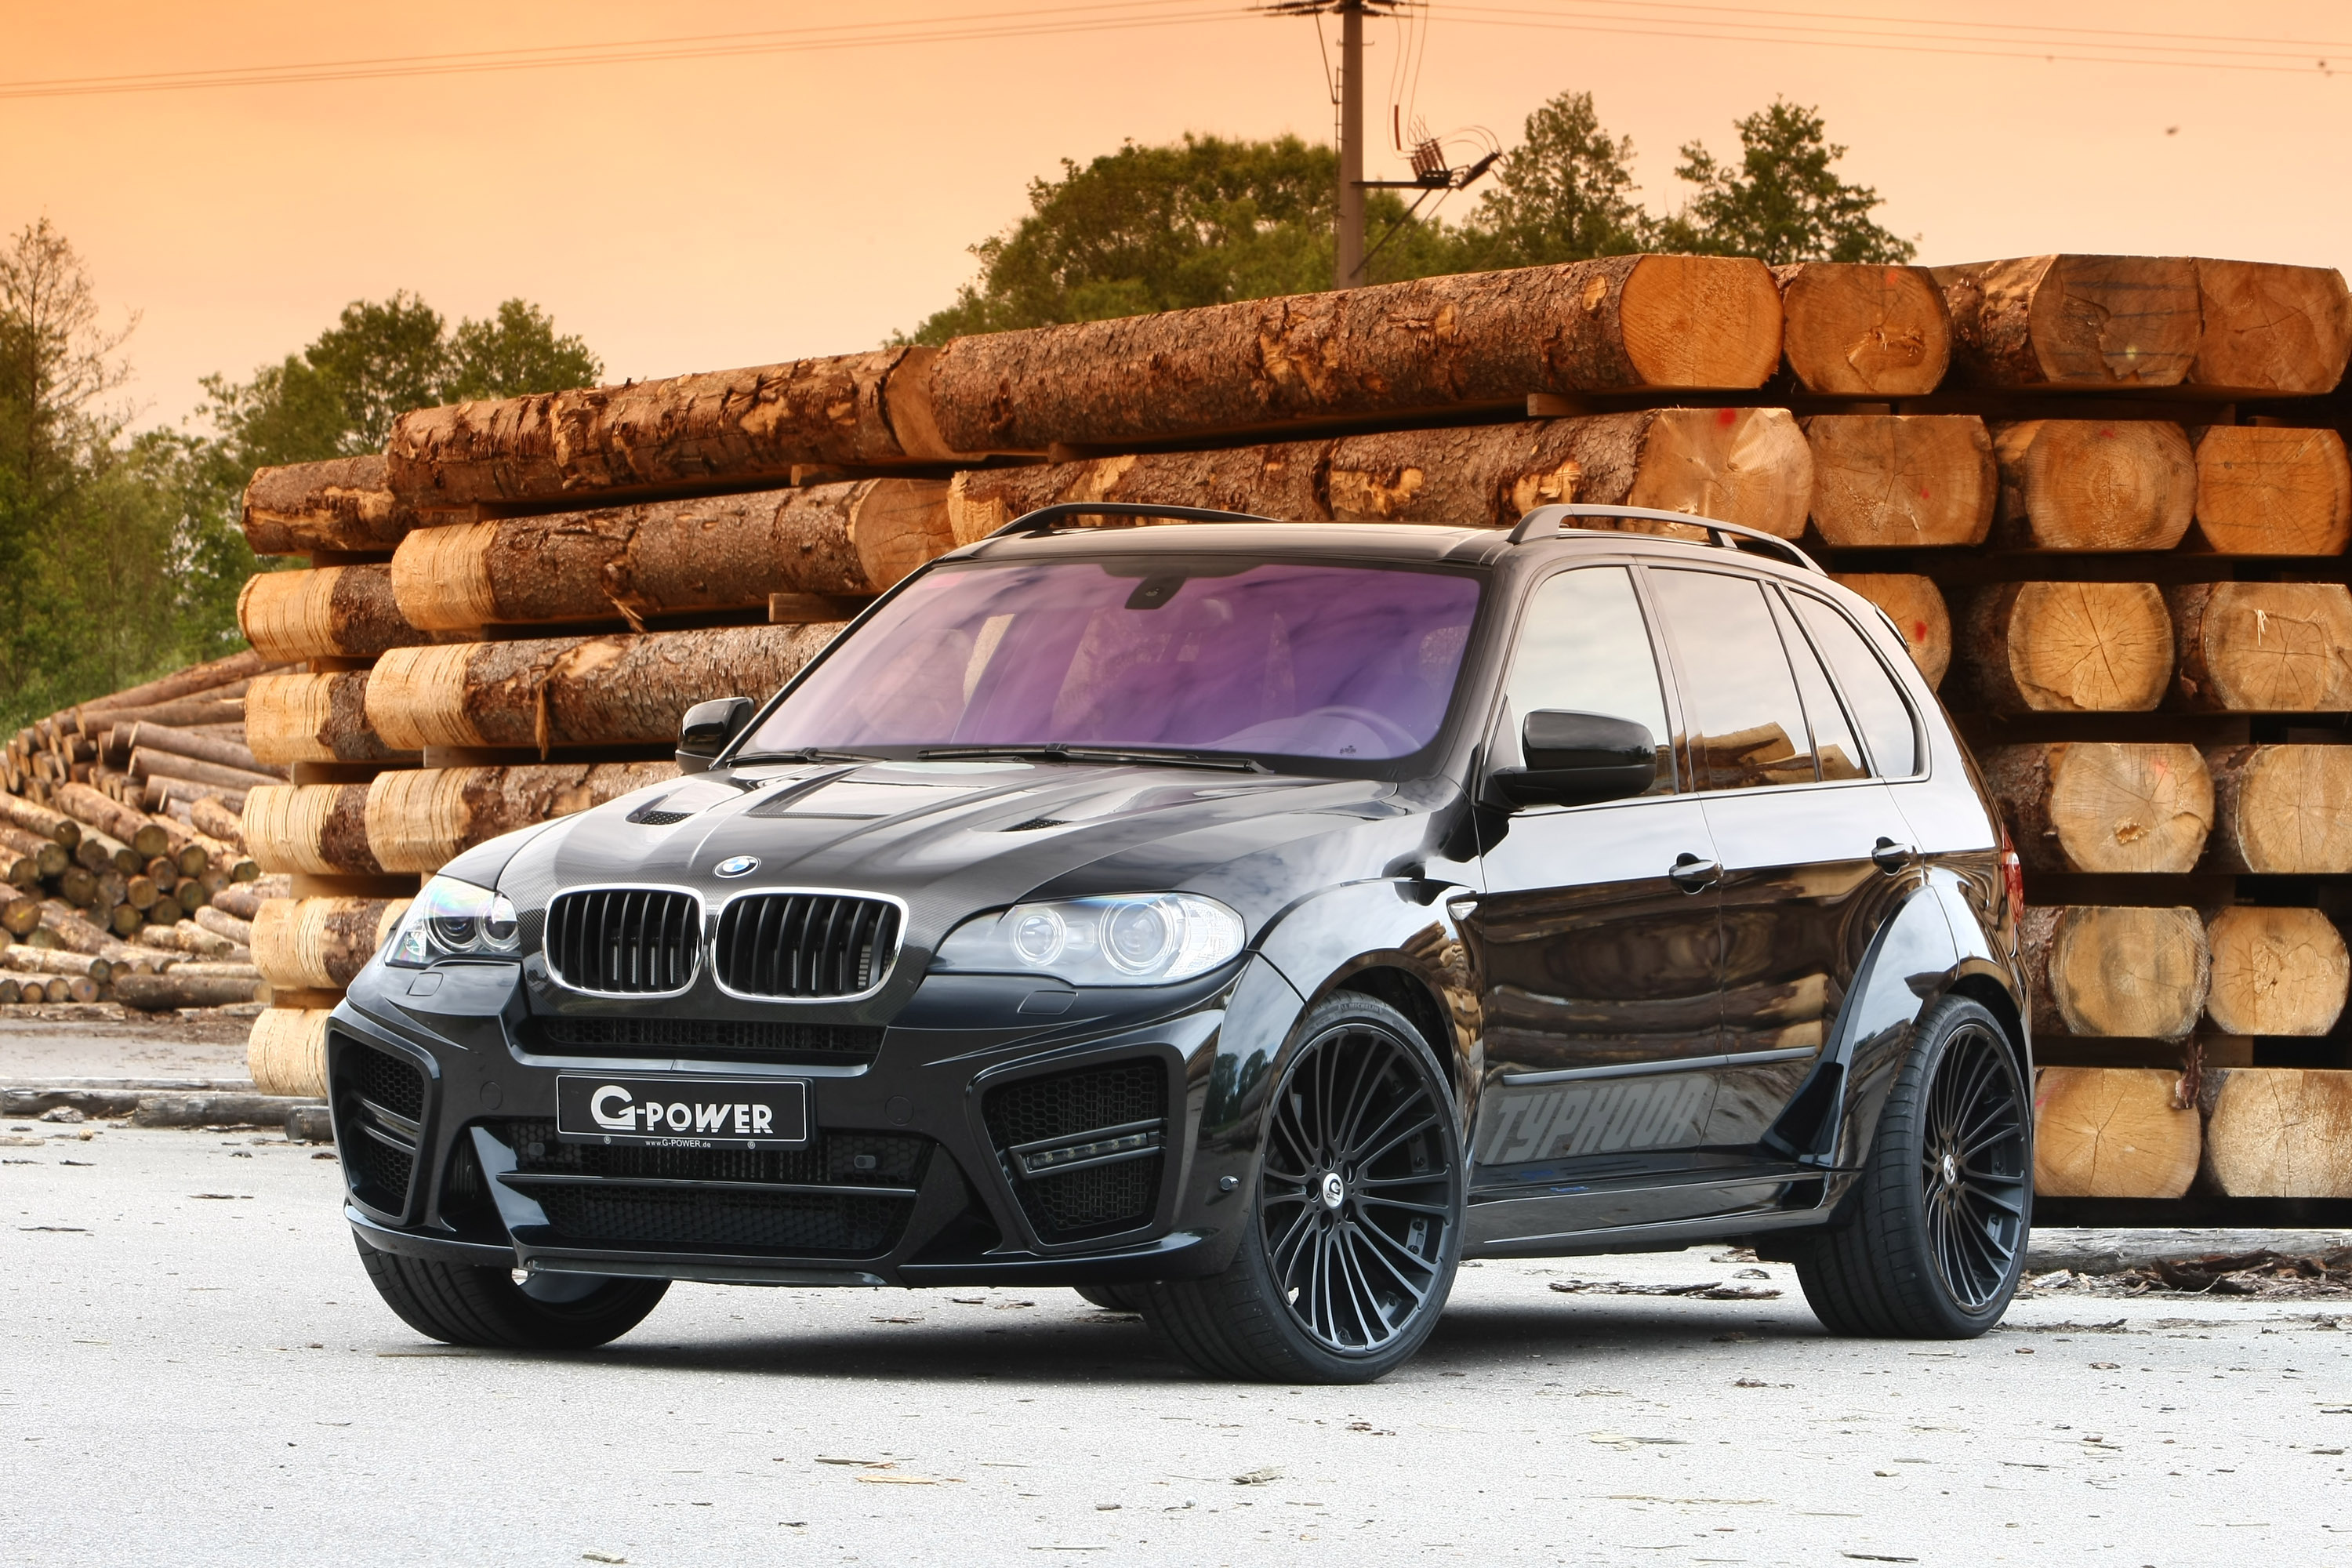 BMW X5 Typhoon Black Pearl, G-Power tuning, Exclusive luxury SUV, Power and style, 3000x2000 HD Desktop